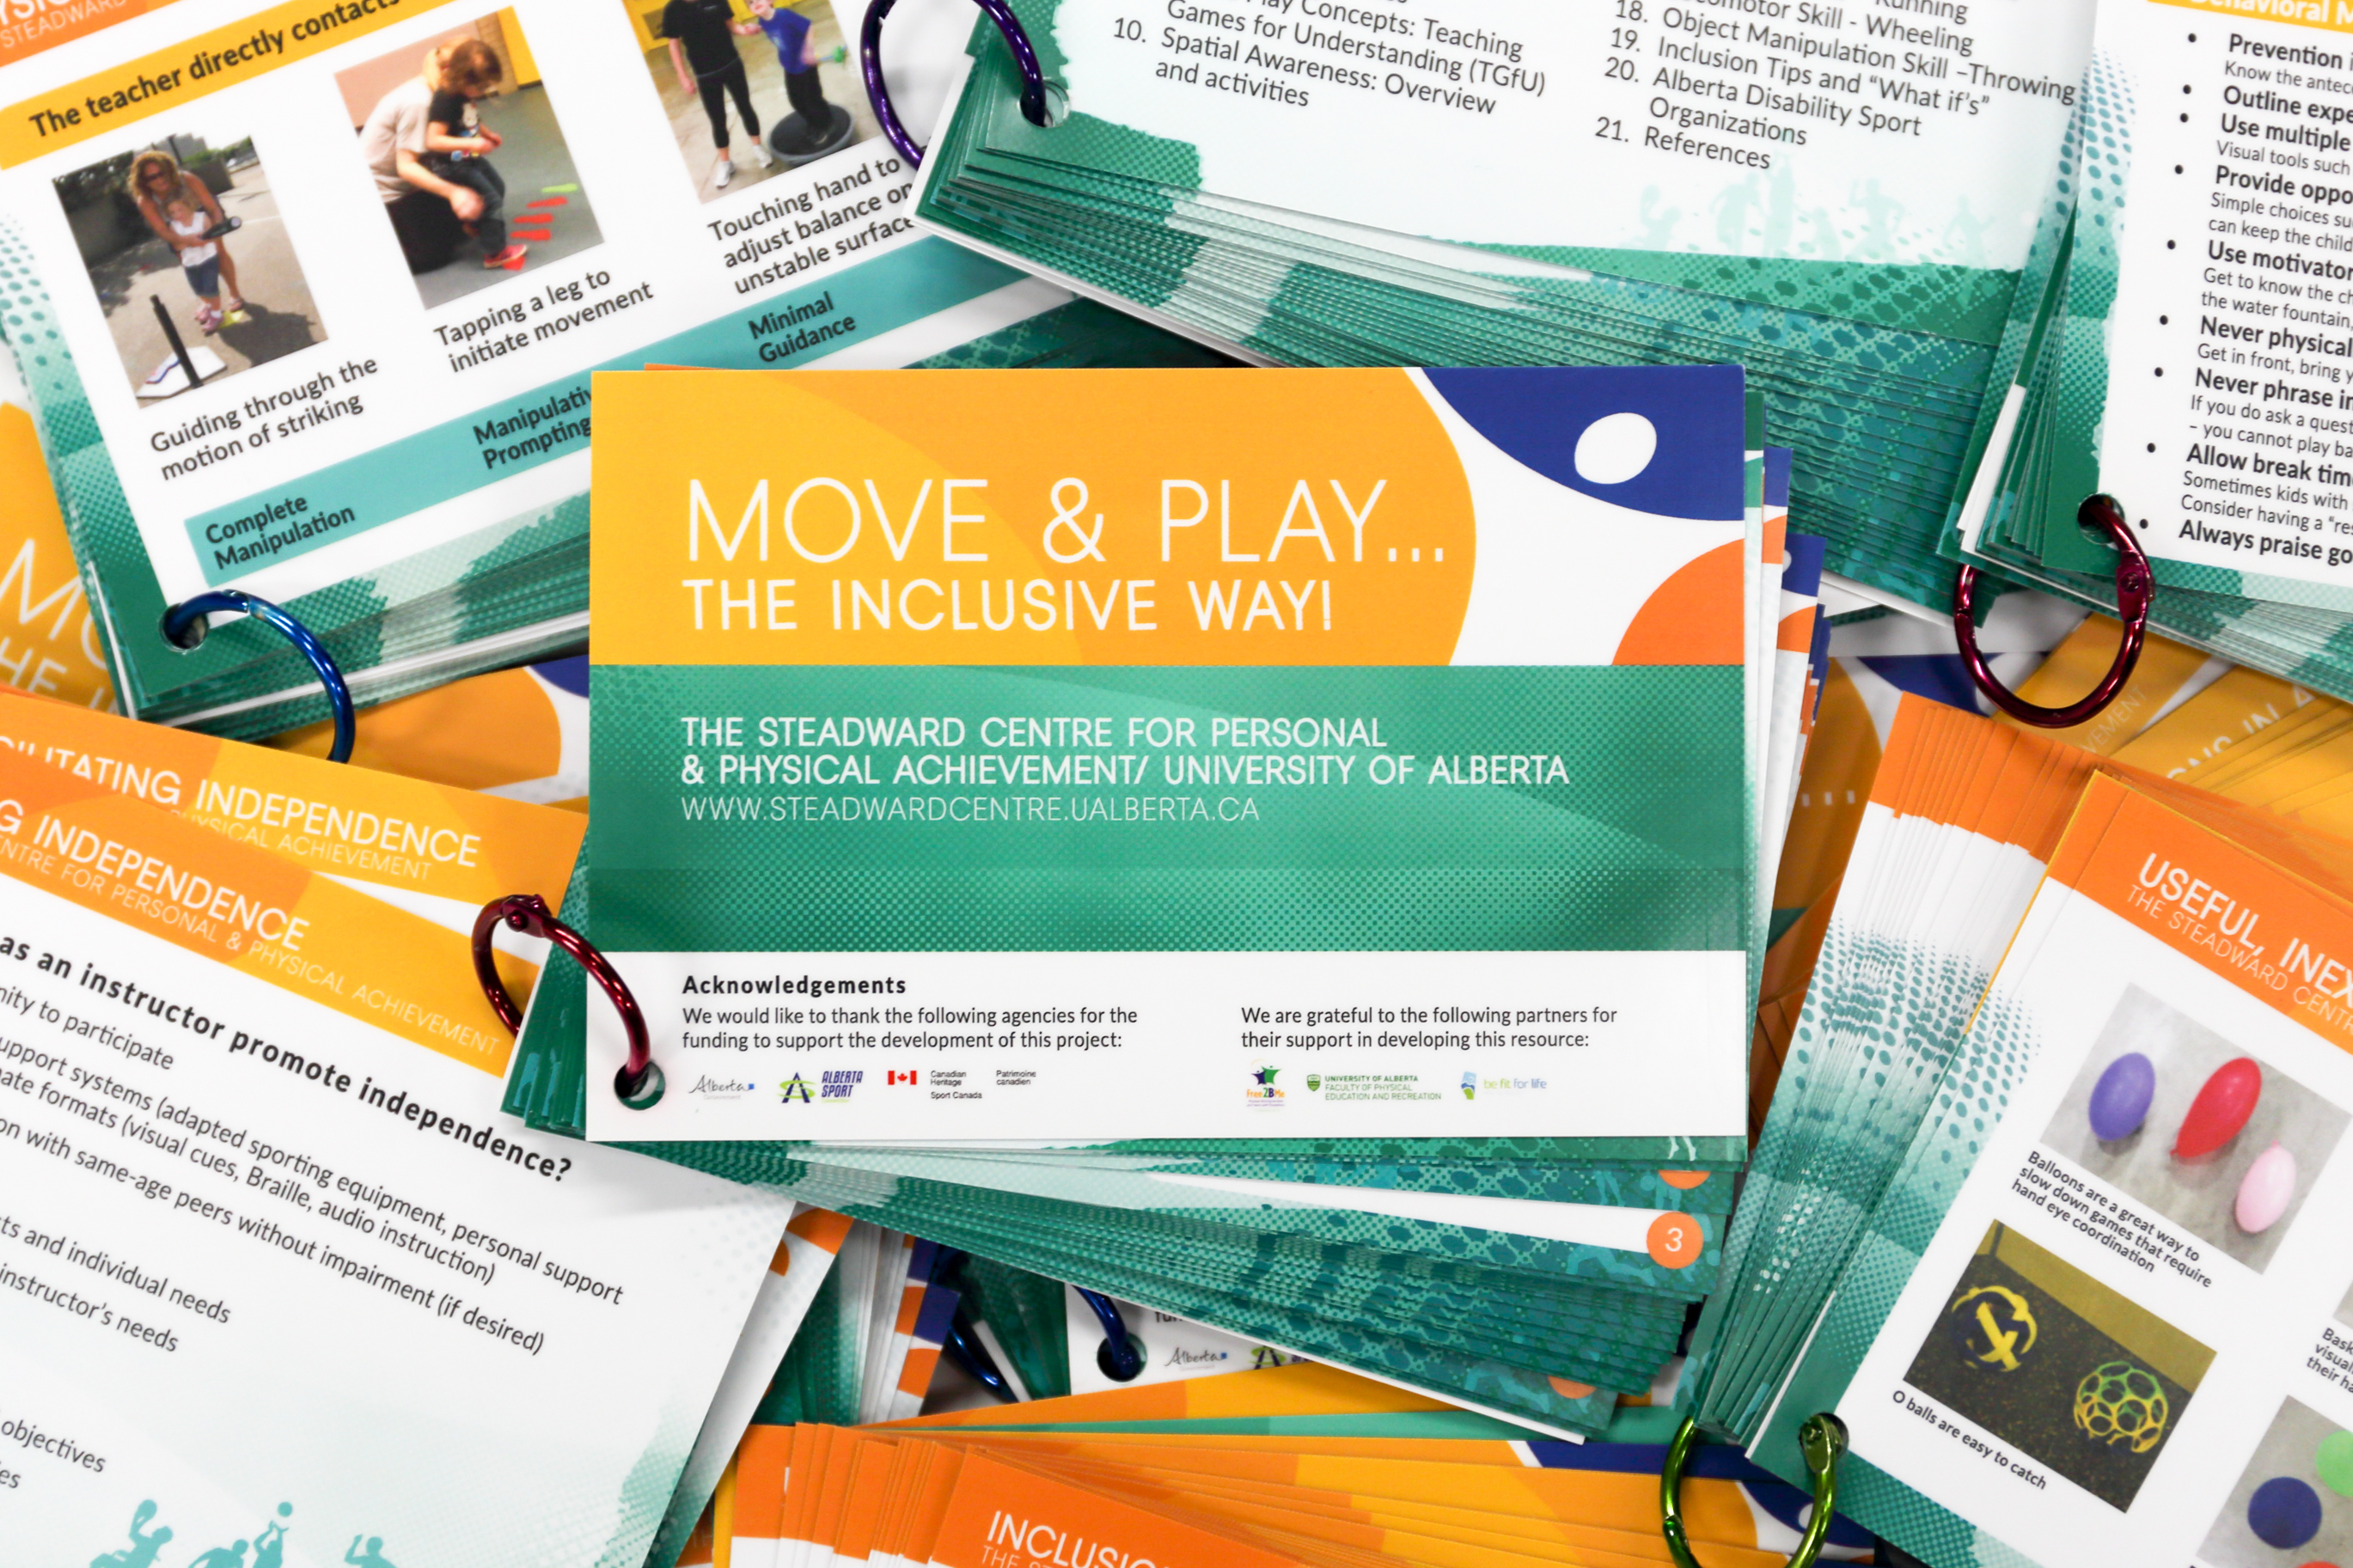 A photo of Move & Play cards